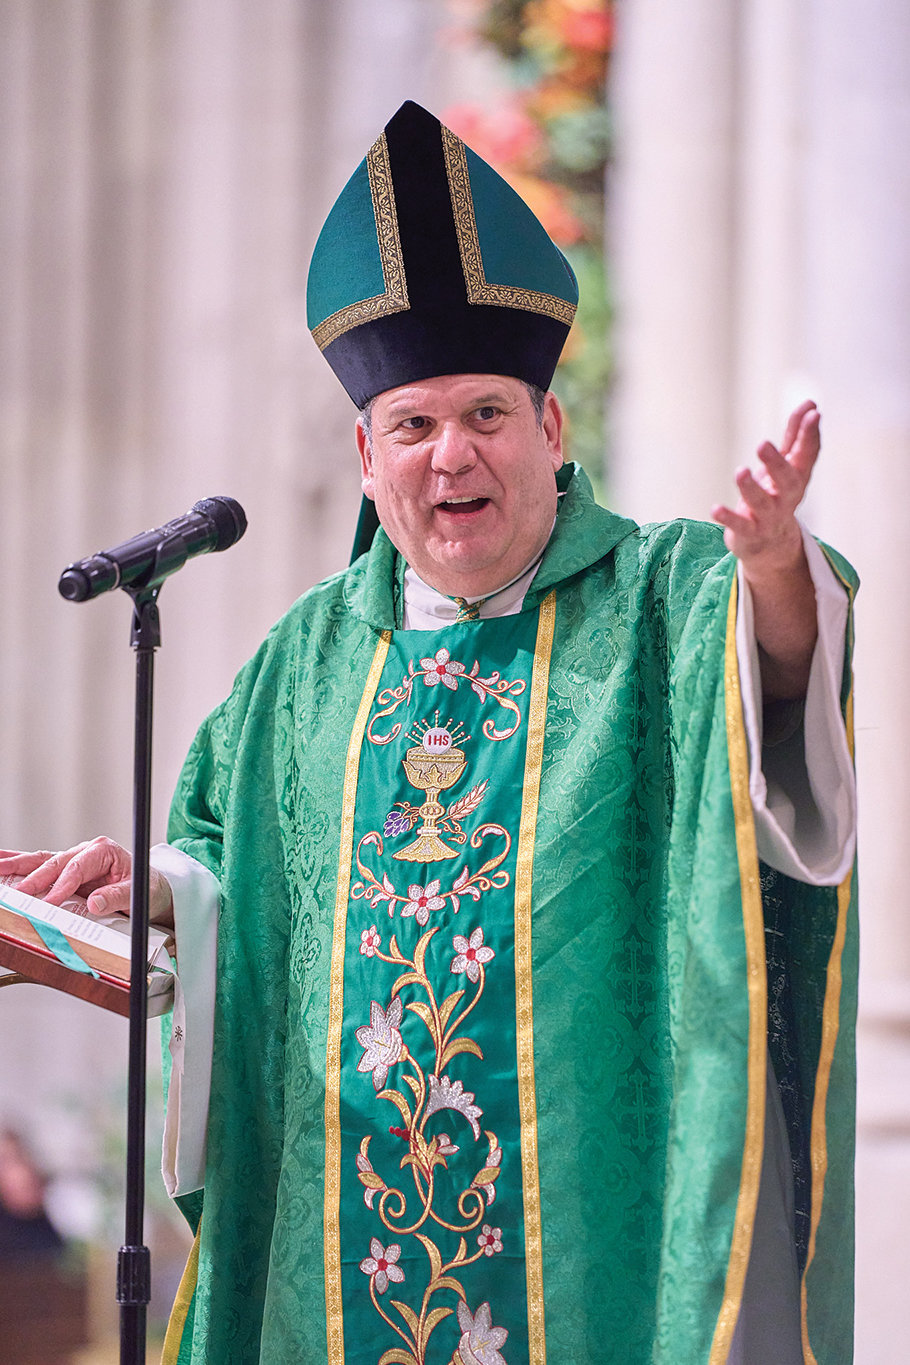 Auxiliary Bishop Manuel Aurelio Cruz of the Archdiocese of Newark told the congregation at St. Patrick’s Cathedral Oct. 30 about imitating the virtues of the Divine Child Jesus.